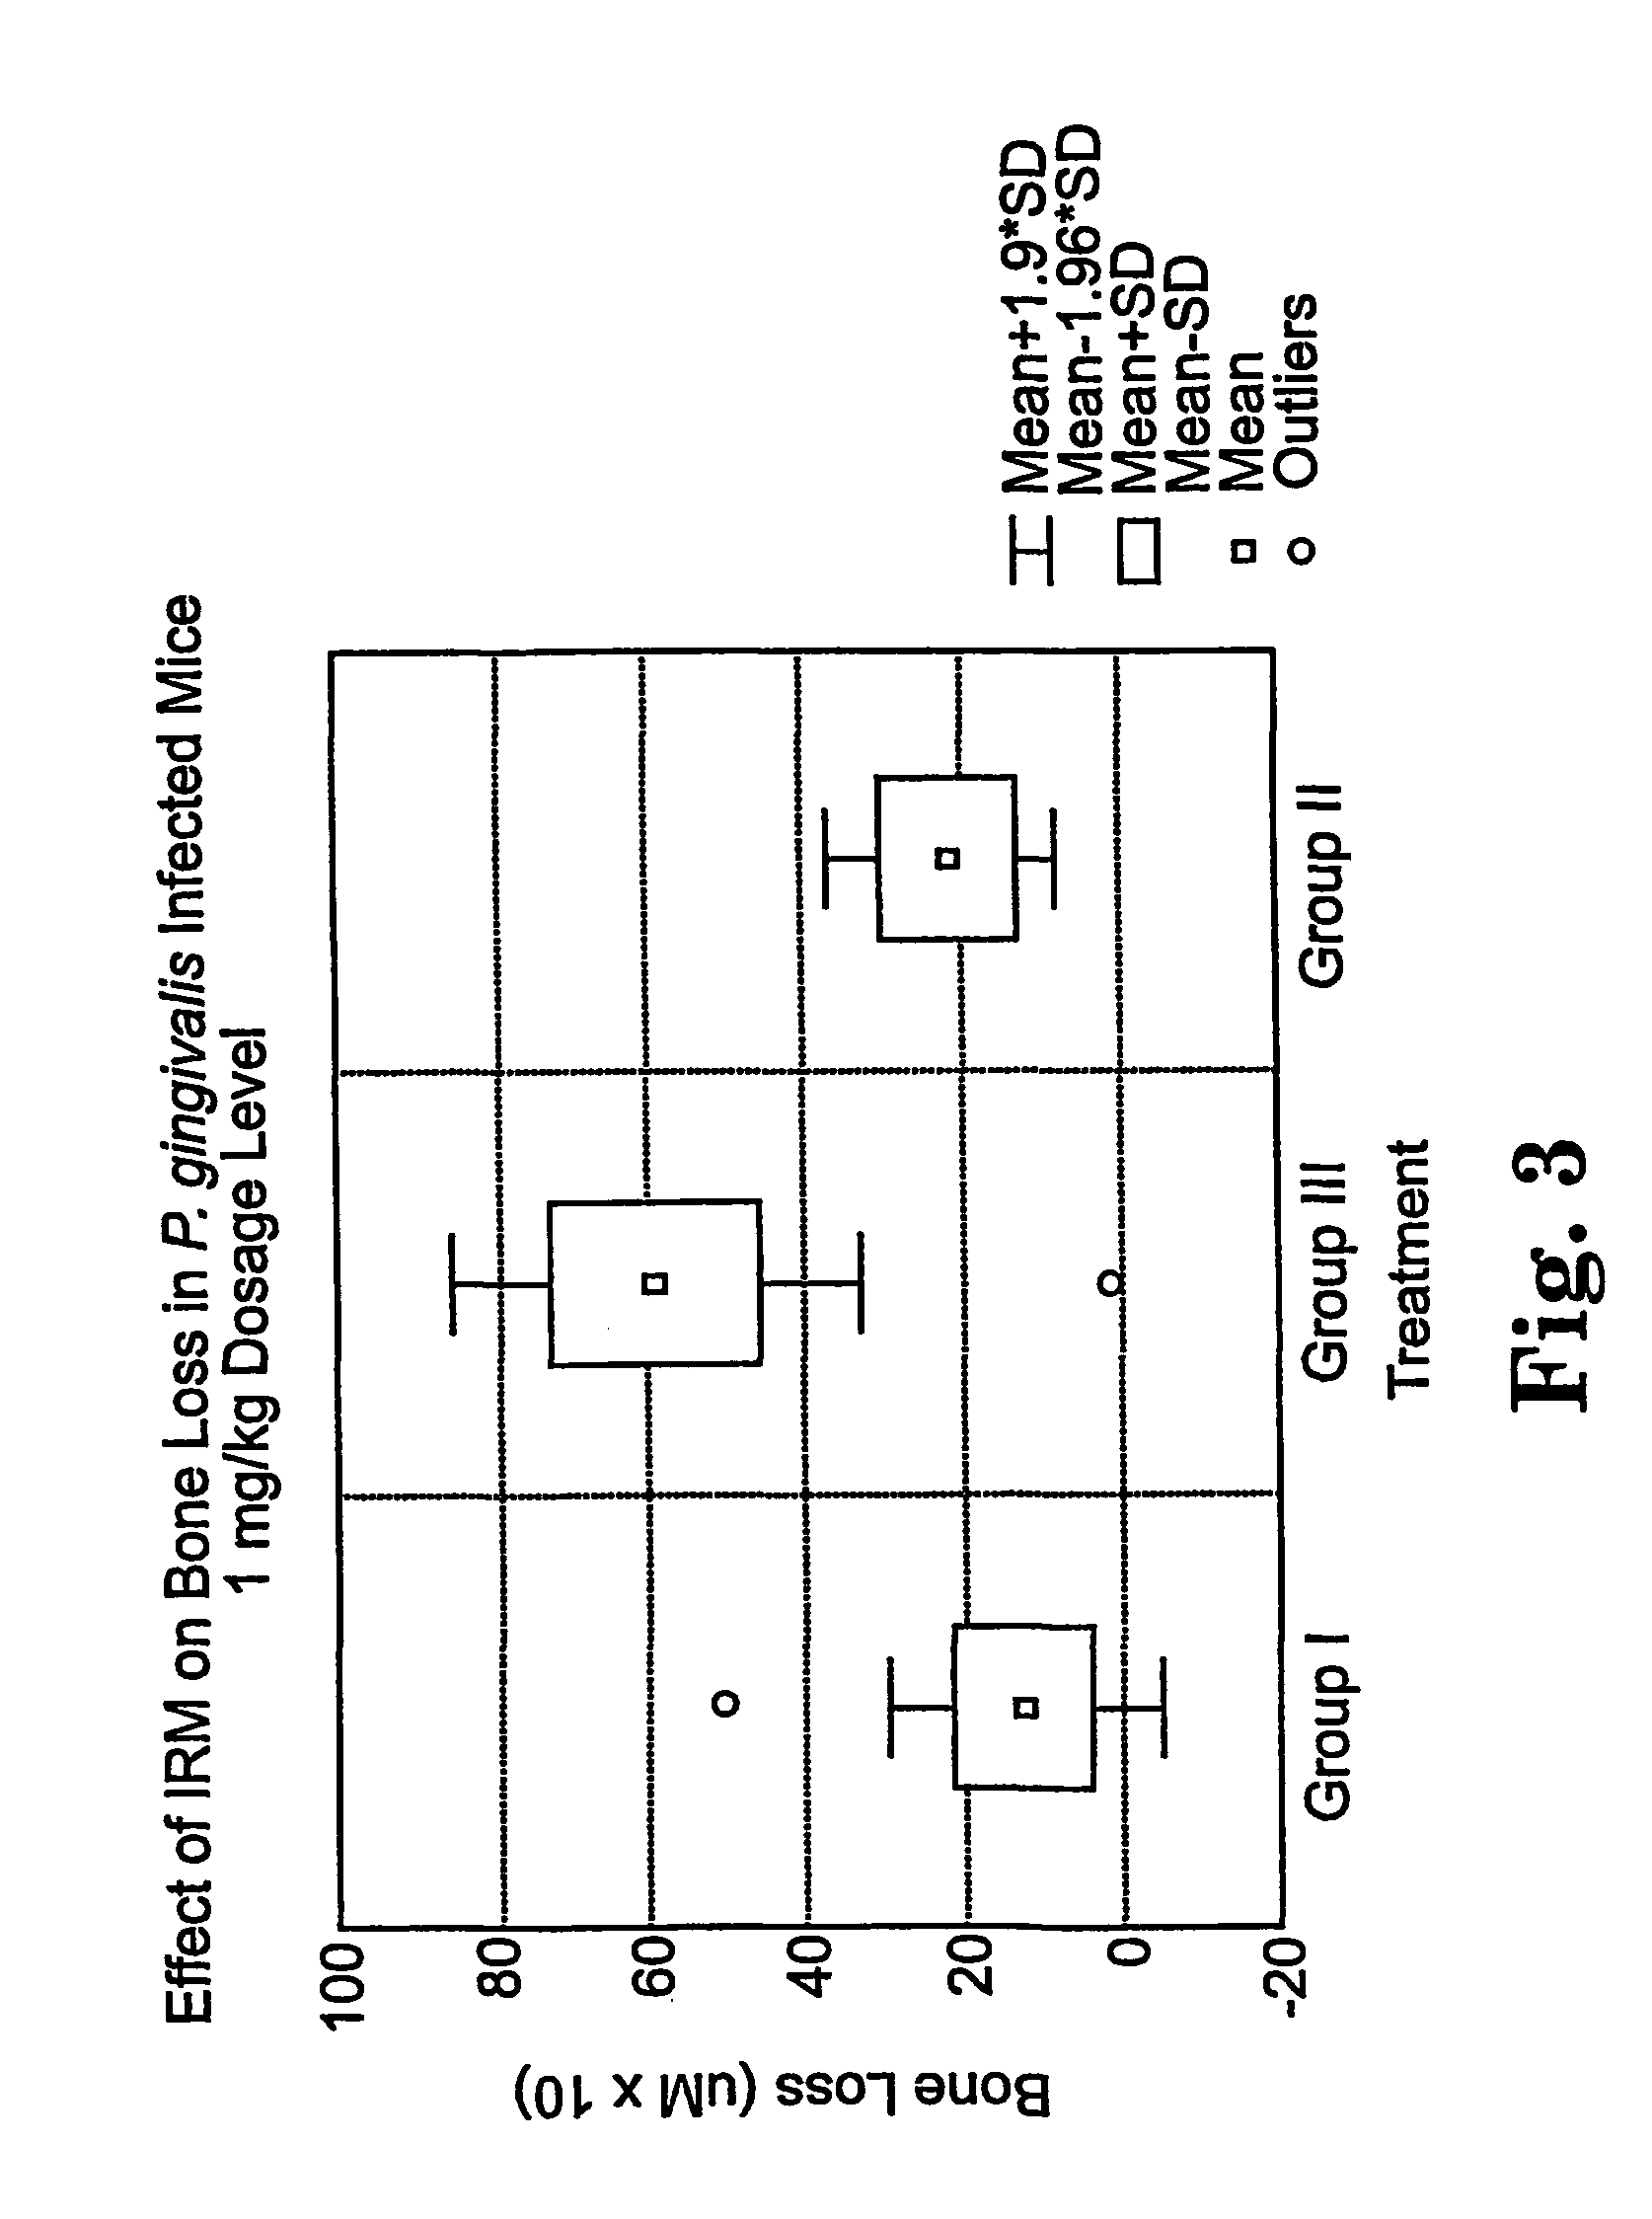 Methods for the treatment of periodontal disease